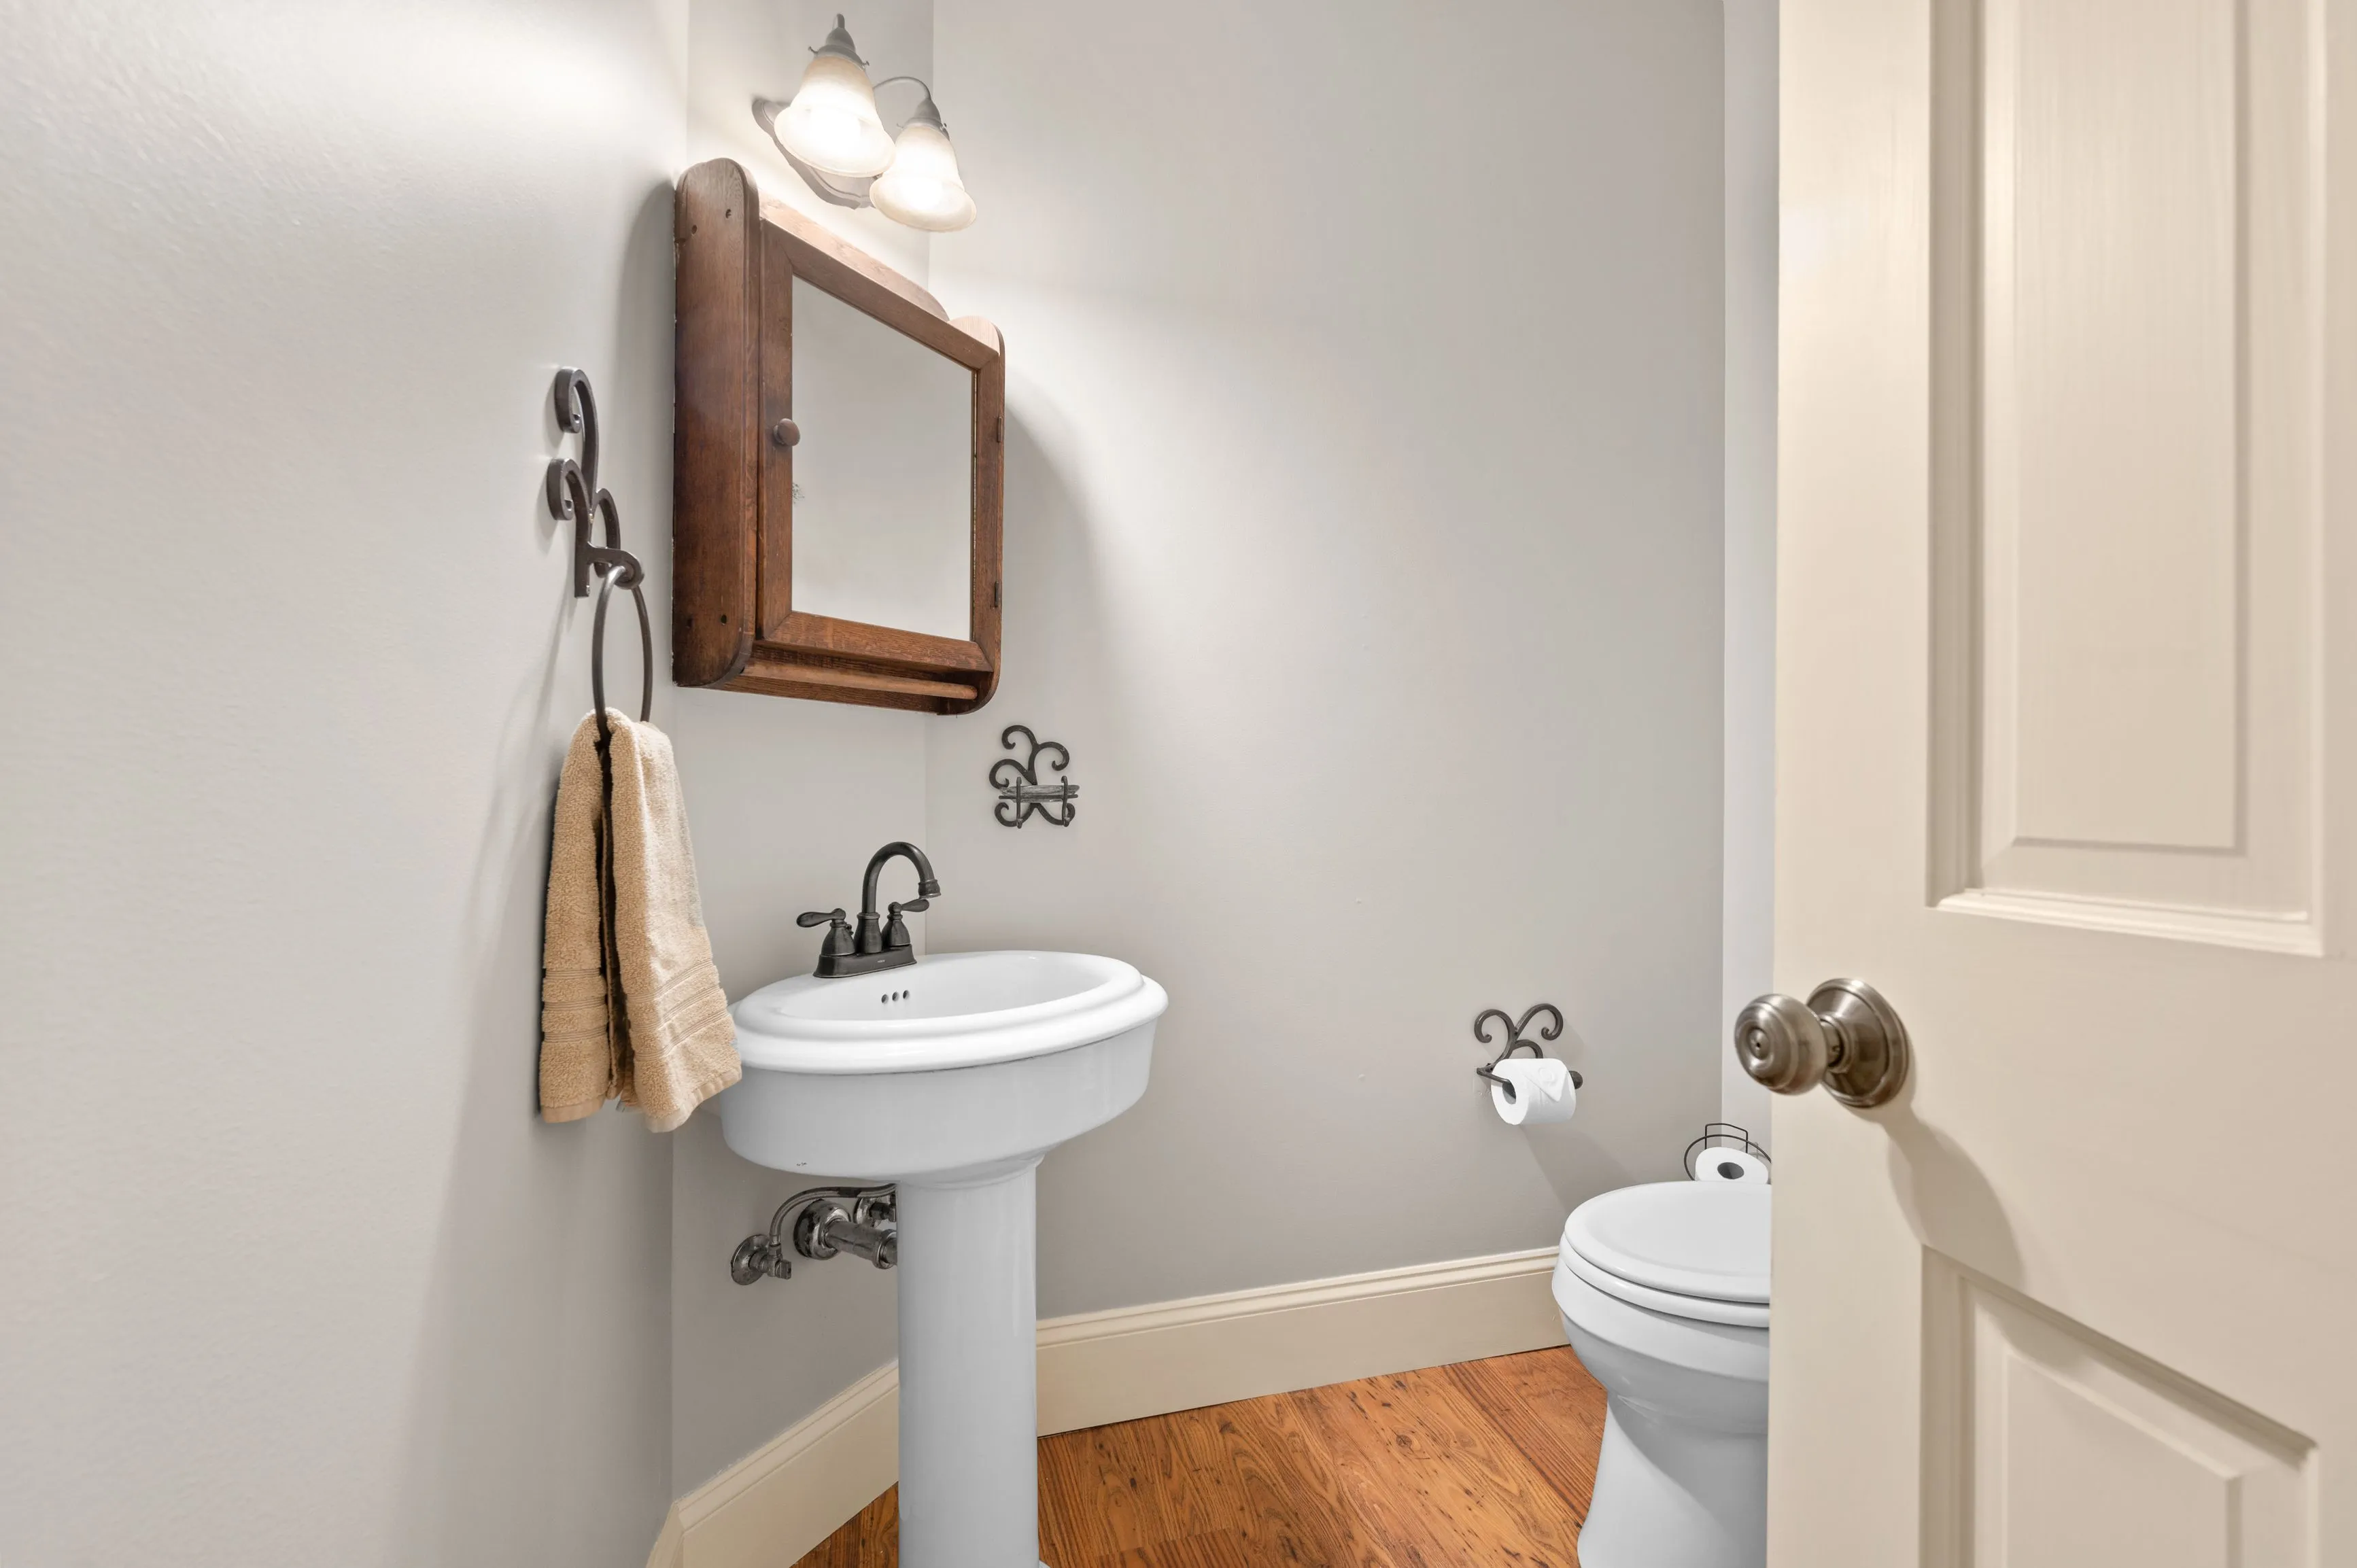 A small bathroom with wooden floors, white pedestal sink, toilet, beige towel on a hook, wooden mirror, and wall-mounted lights.